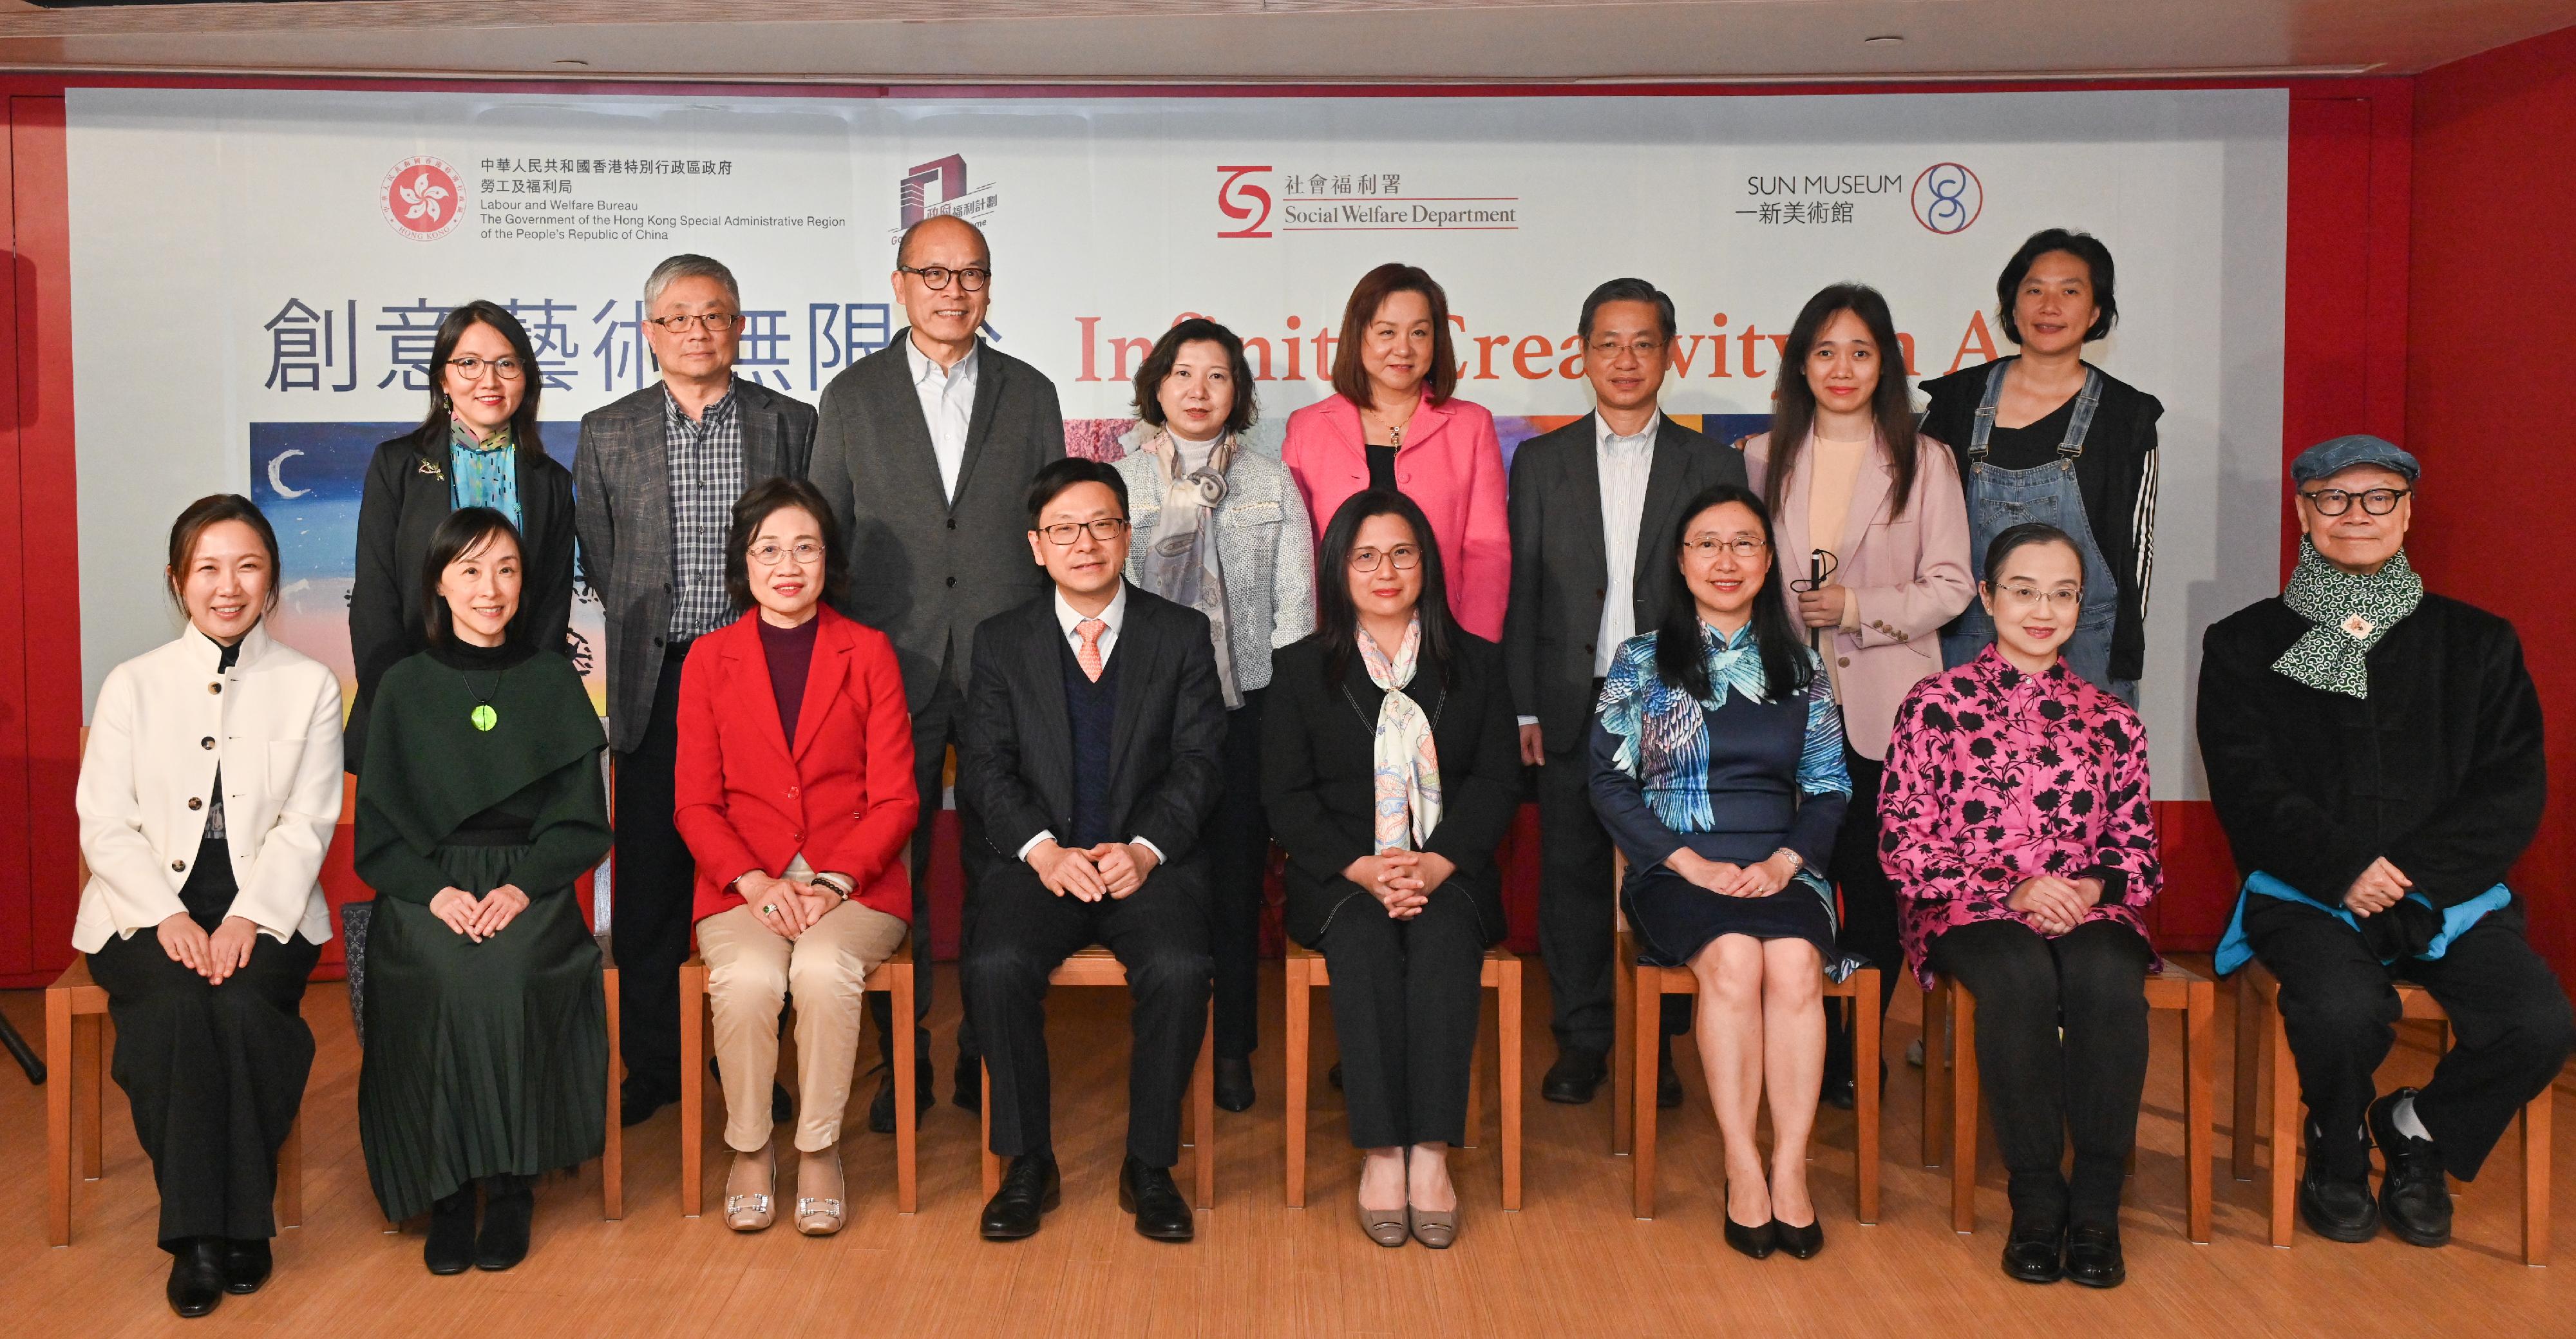 The Opening Ceremony of the "Infinite Creativity in Art" Exhibition, jointly organised by the Labour and Welfare Bureau, the Social Welfare Department (SWD), the Arts Development Fund for Persons with Disabilities (the Arts Fund) and Sun Museum, was held today (January 11). Photo shows guests with the Vice-chairman of the Rehabilitation Advisory Committee, Dr Kevin Lau (back row, third left); the Chairperson of the Management Committee of the Arts Fund and Assistant Director (Rehabilitation and Medical Social Services) of the SWD, Ms Maggie Leung (back row, fourth left); the Chairperson of the Grants Sub-committee of the Arts Funds, Ms Teresa Au (back row, fifth left), and other members. 